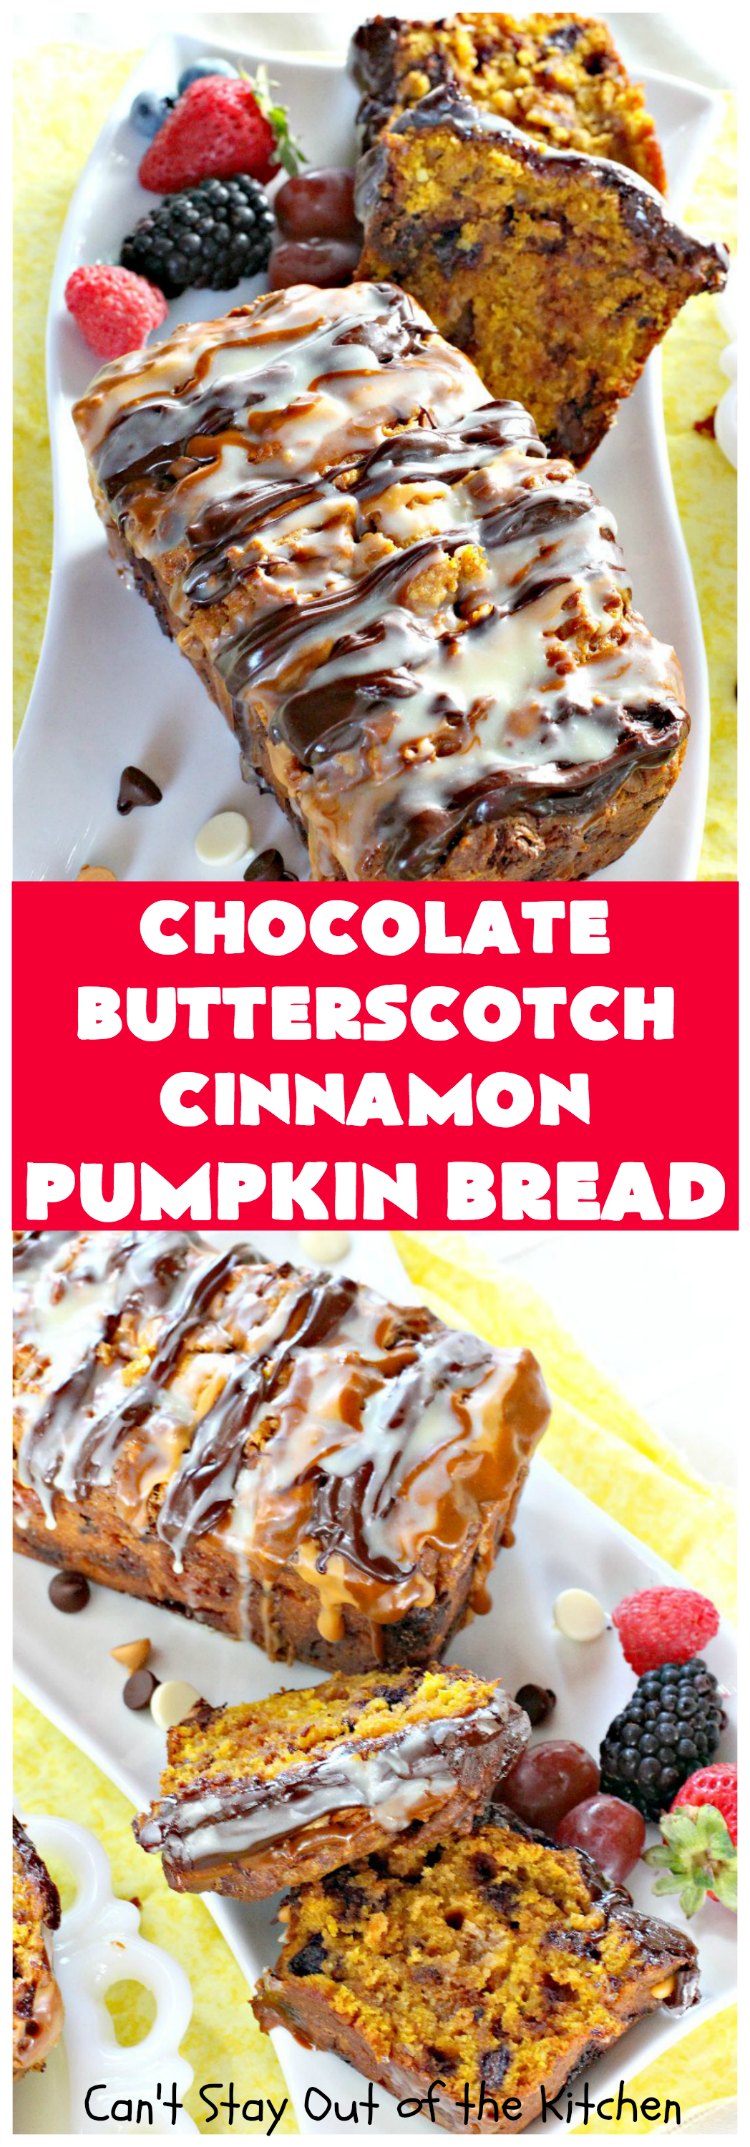 Chocolate Butterscotch Cinnamon Pumpkin Bread | Can't Stay Out of the Kitchen